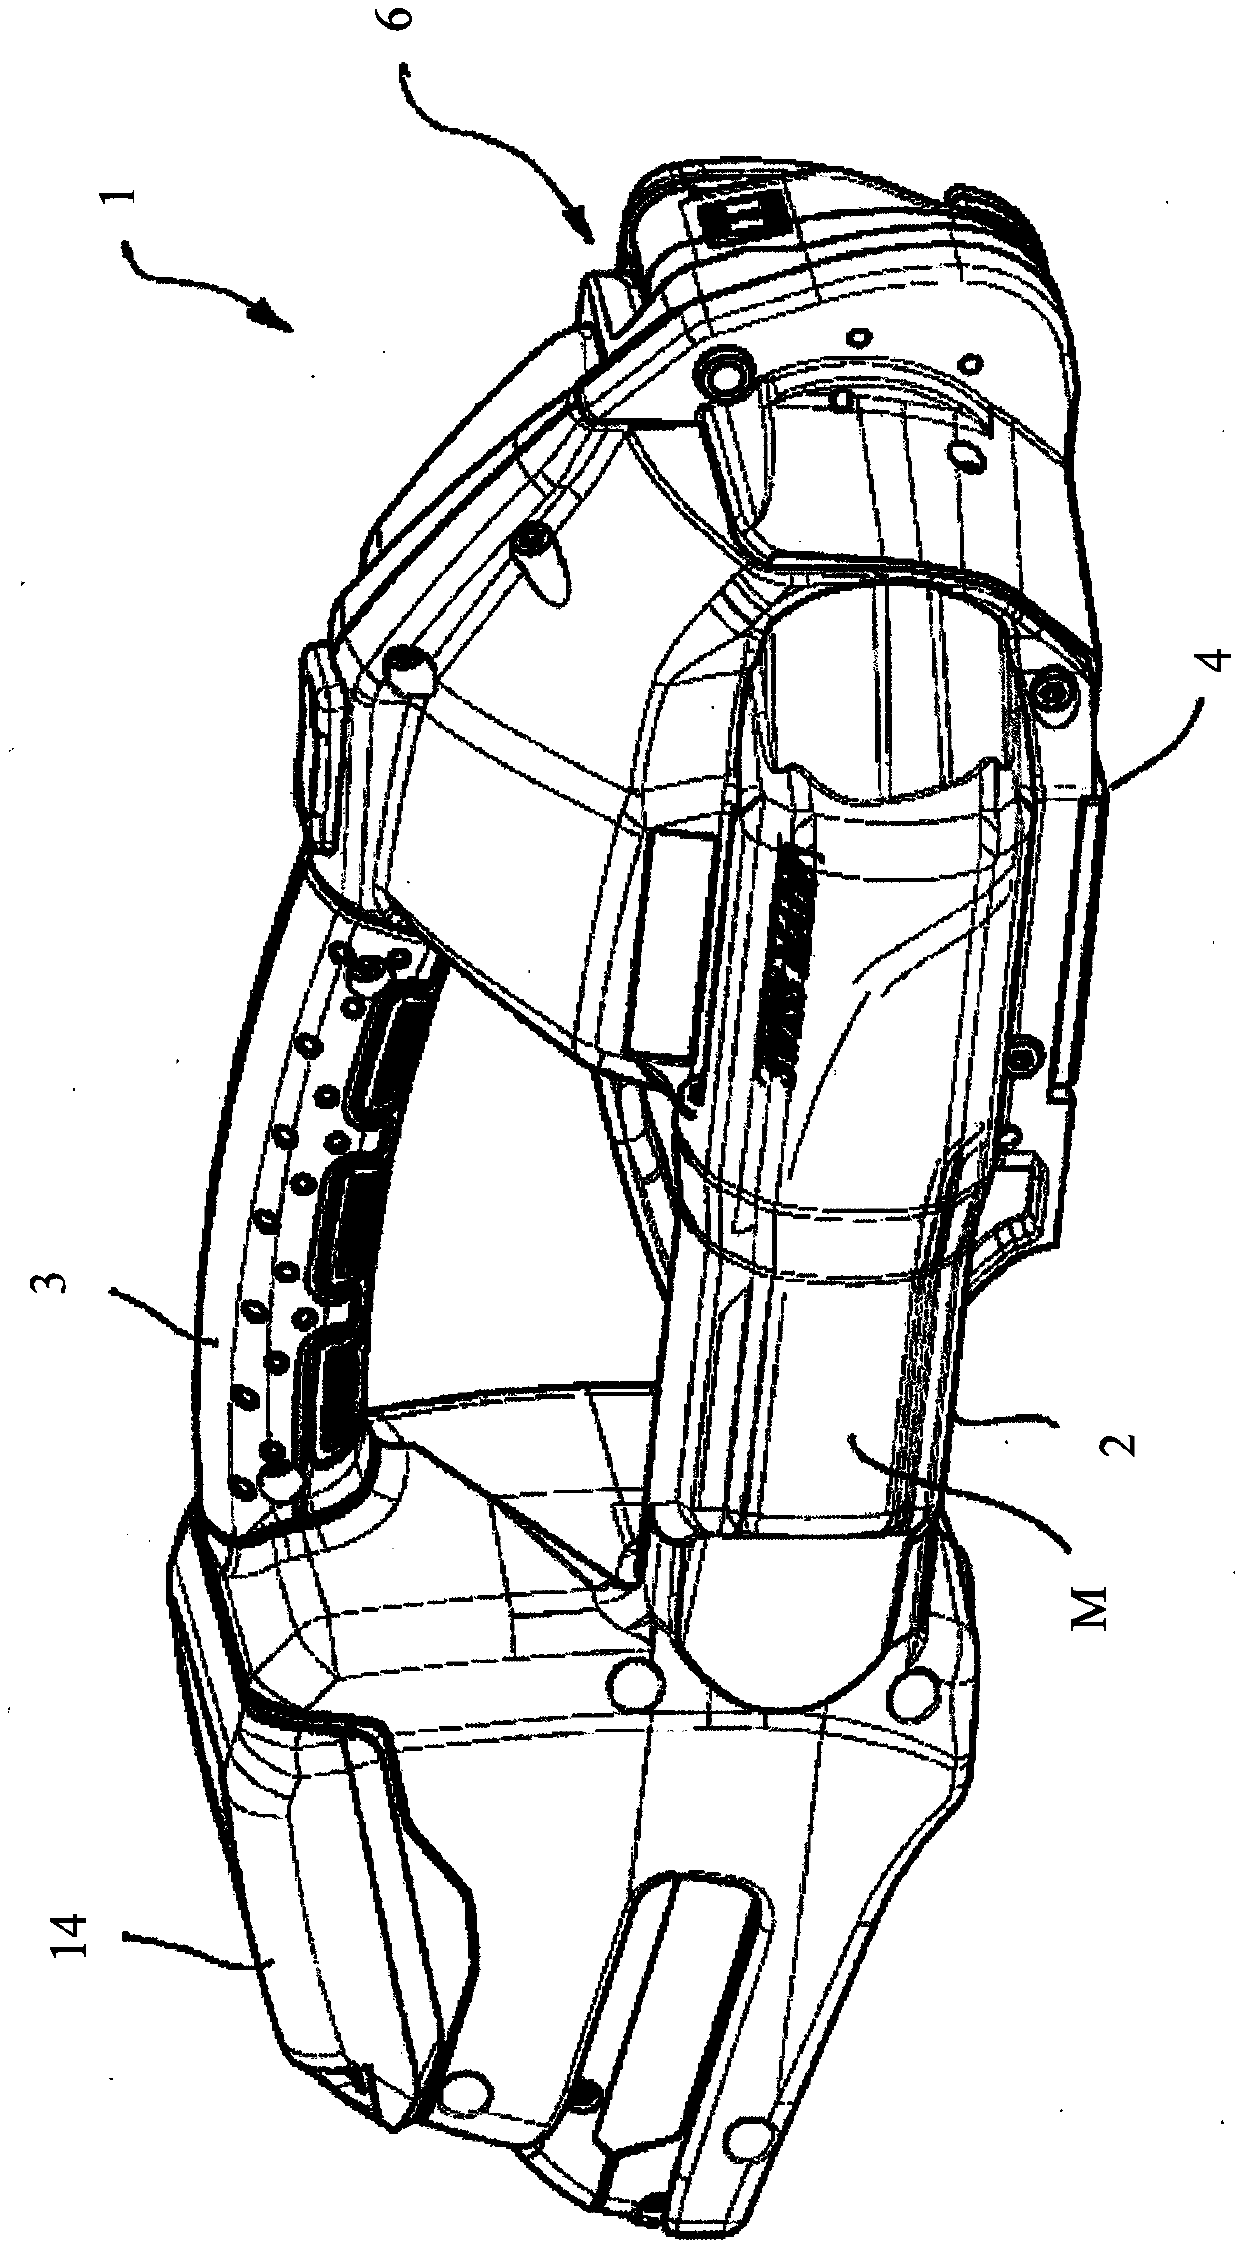 Strapping apparatus